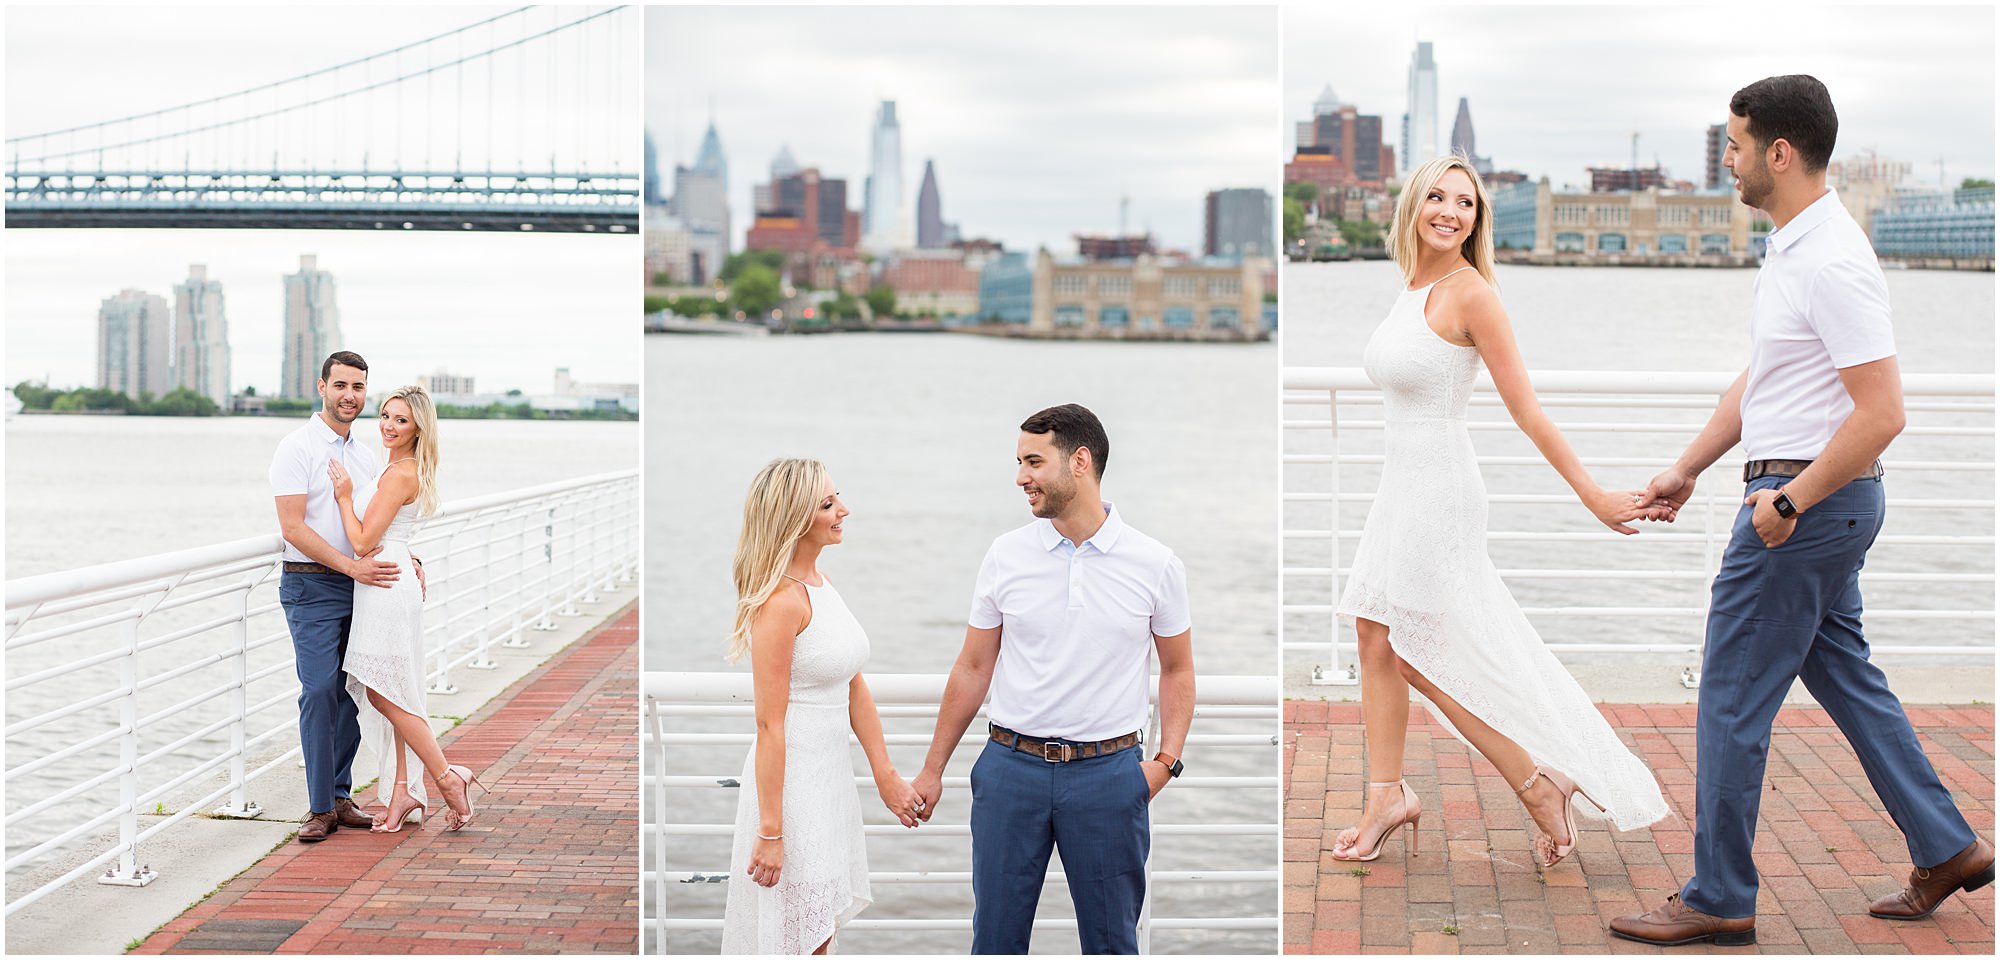 New Jersey Engagement Photo LocationsL The Camden Waterfront